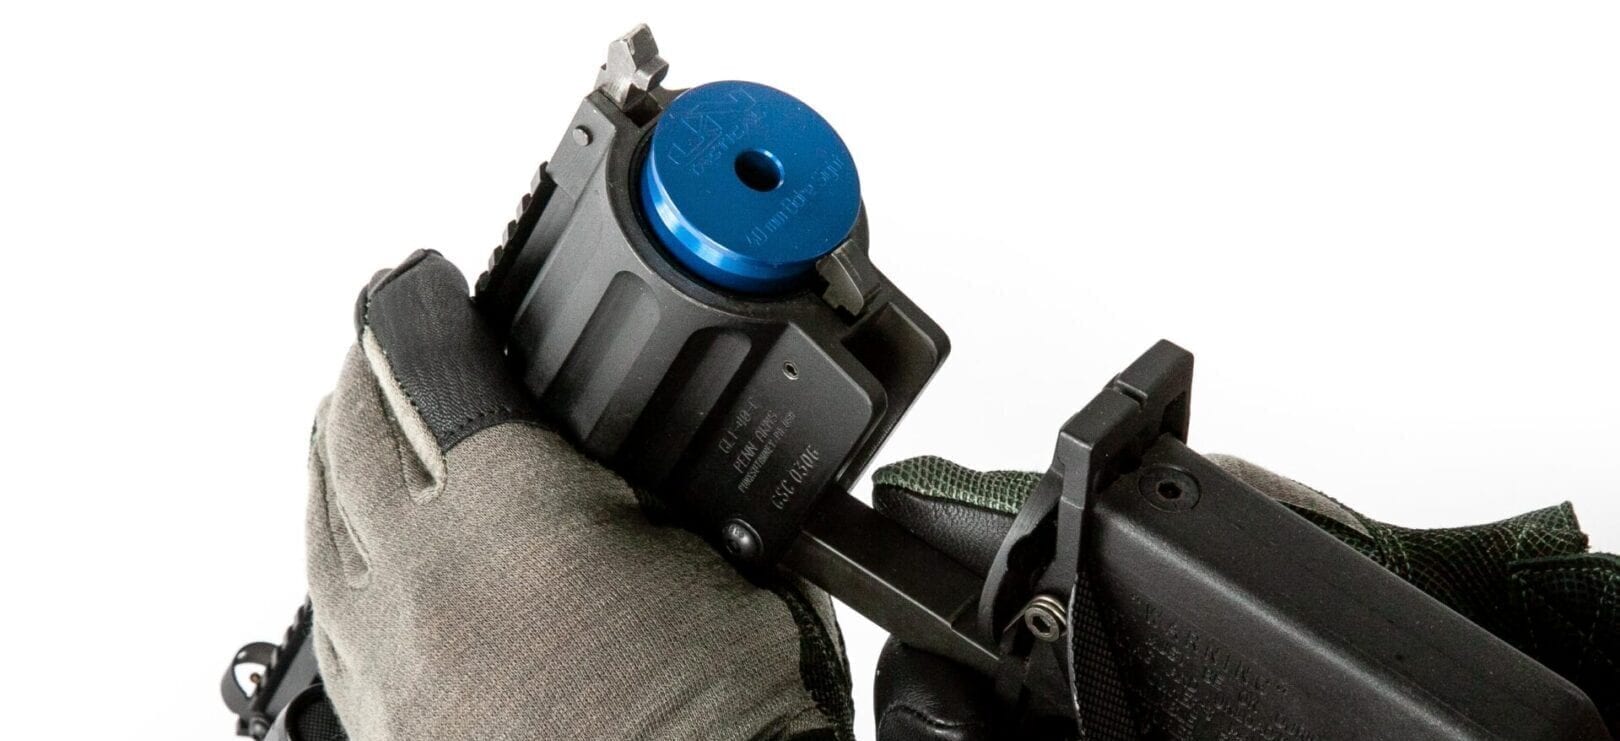 A person holding a gun with a blue button on it.